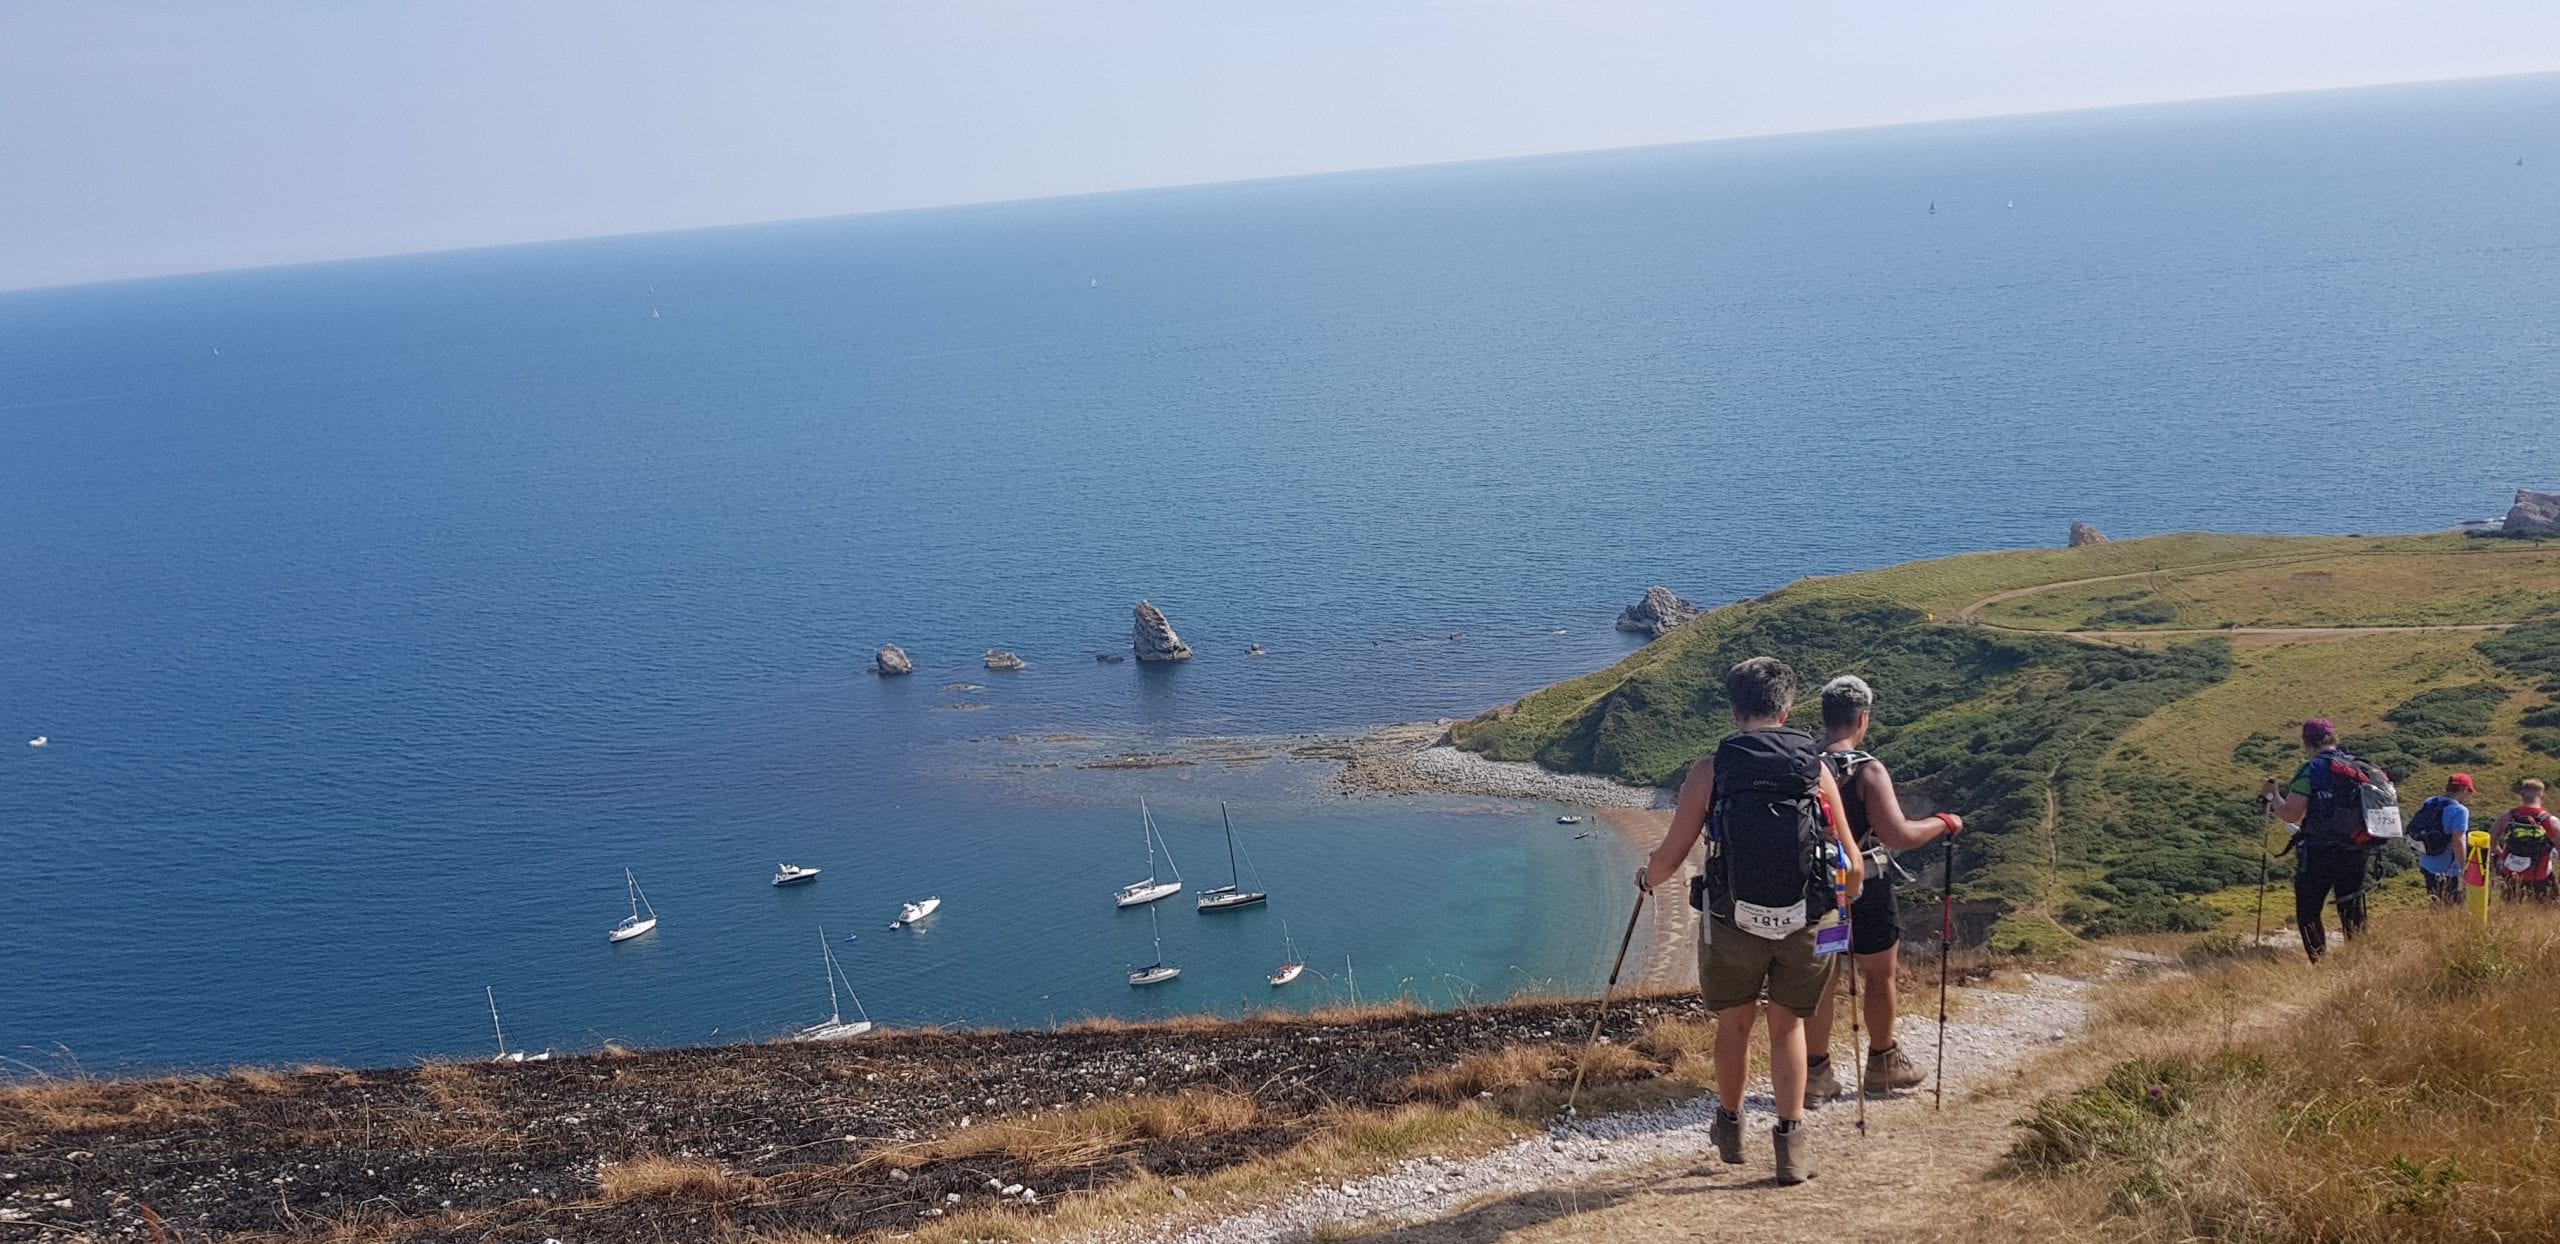 A group of walkers, using poles, walks down a steep coastal path. The sea is visible in the background. Its a sunny day and the sea is blue.